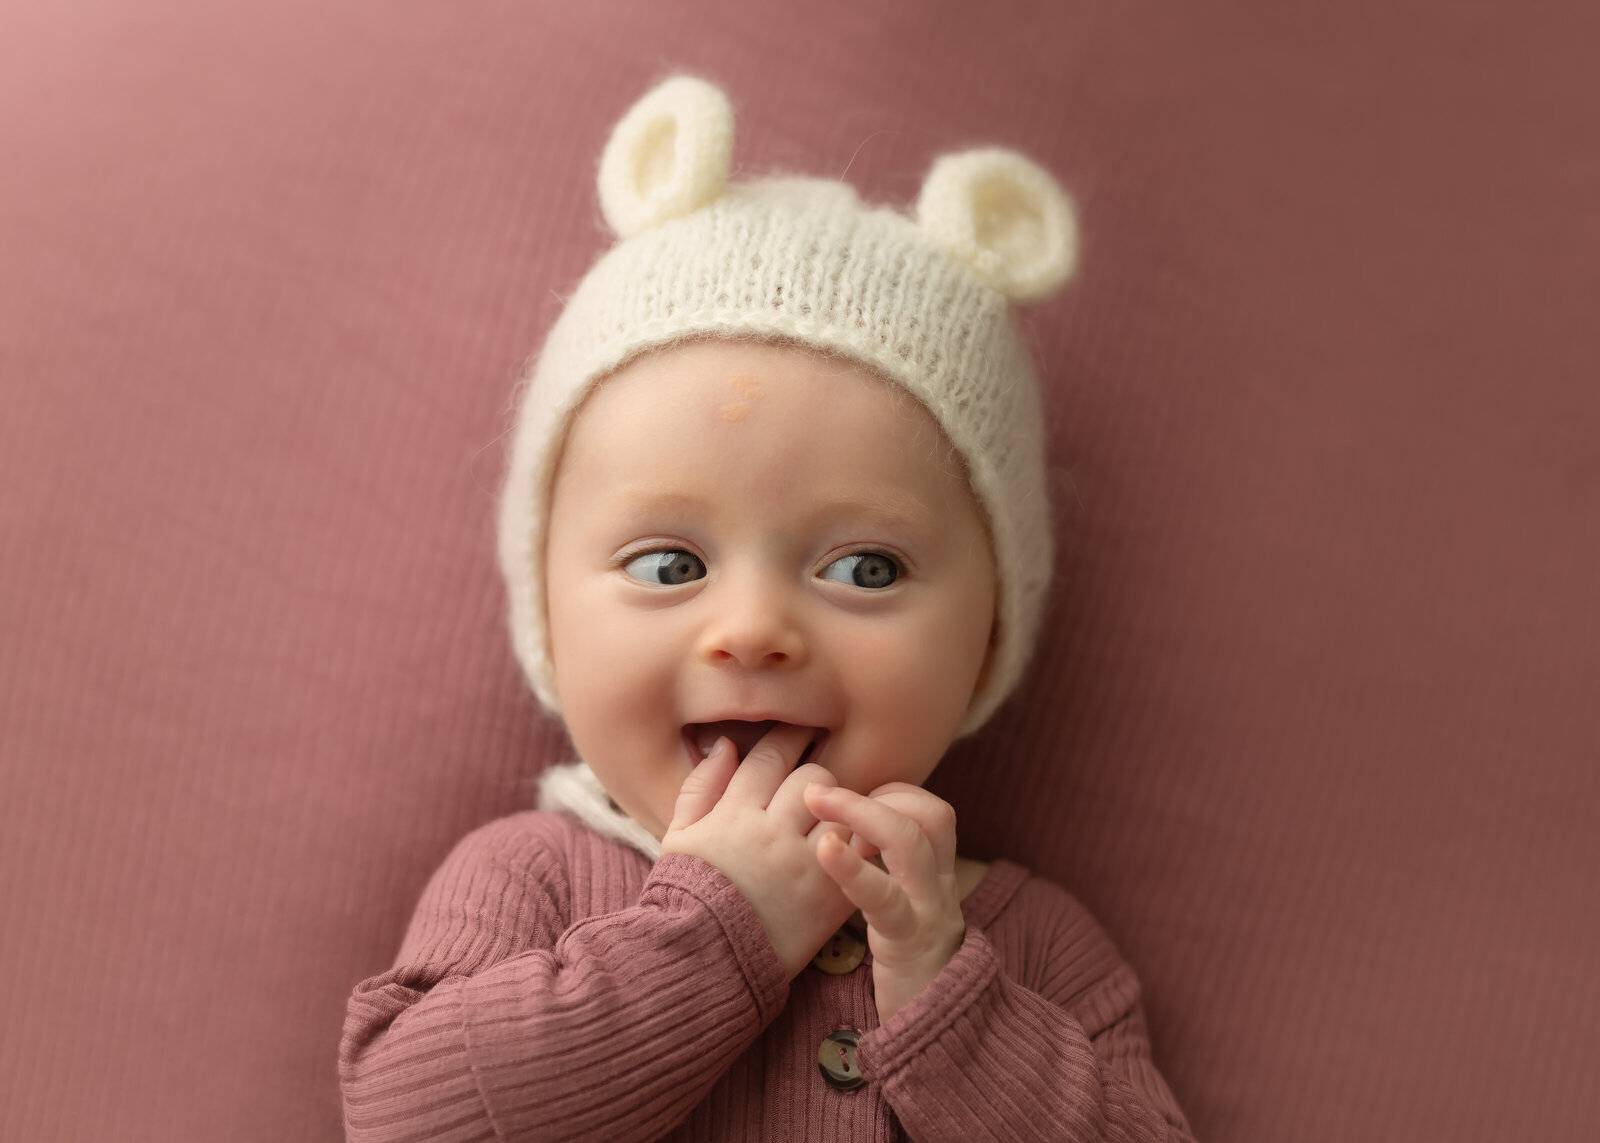 happy baby on mauve background with a teddy bear hat and fingers in mouth